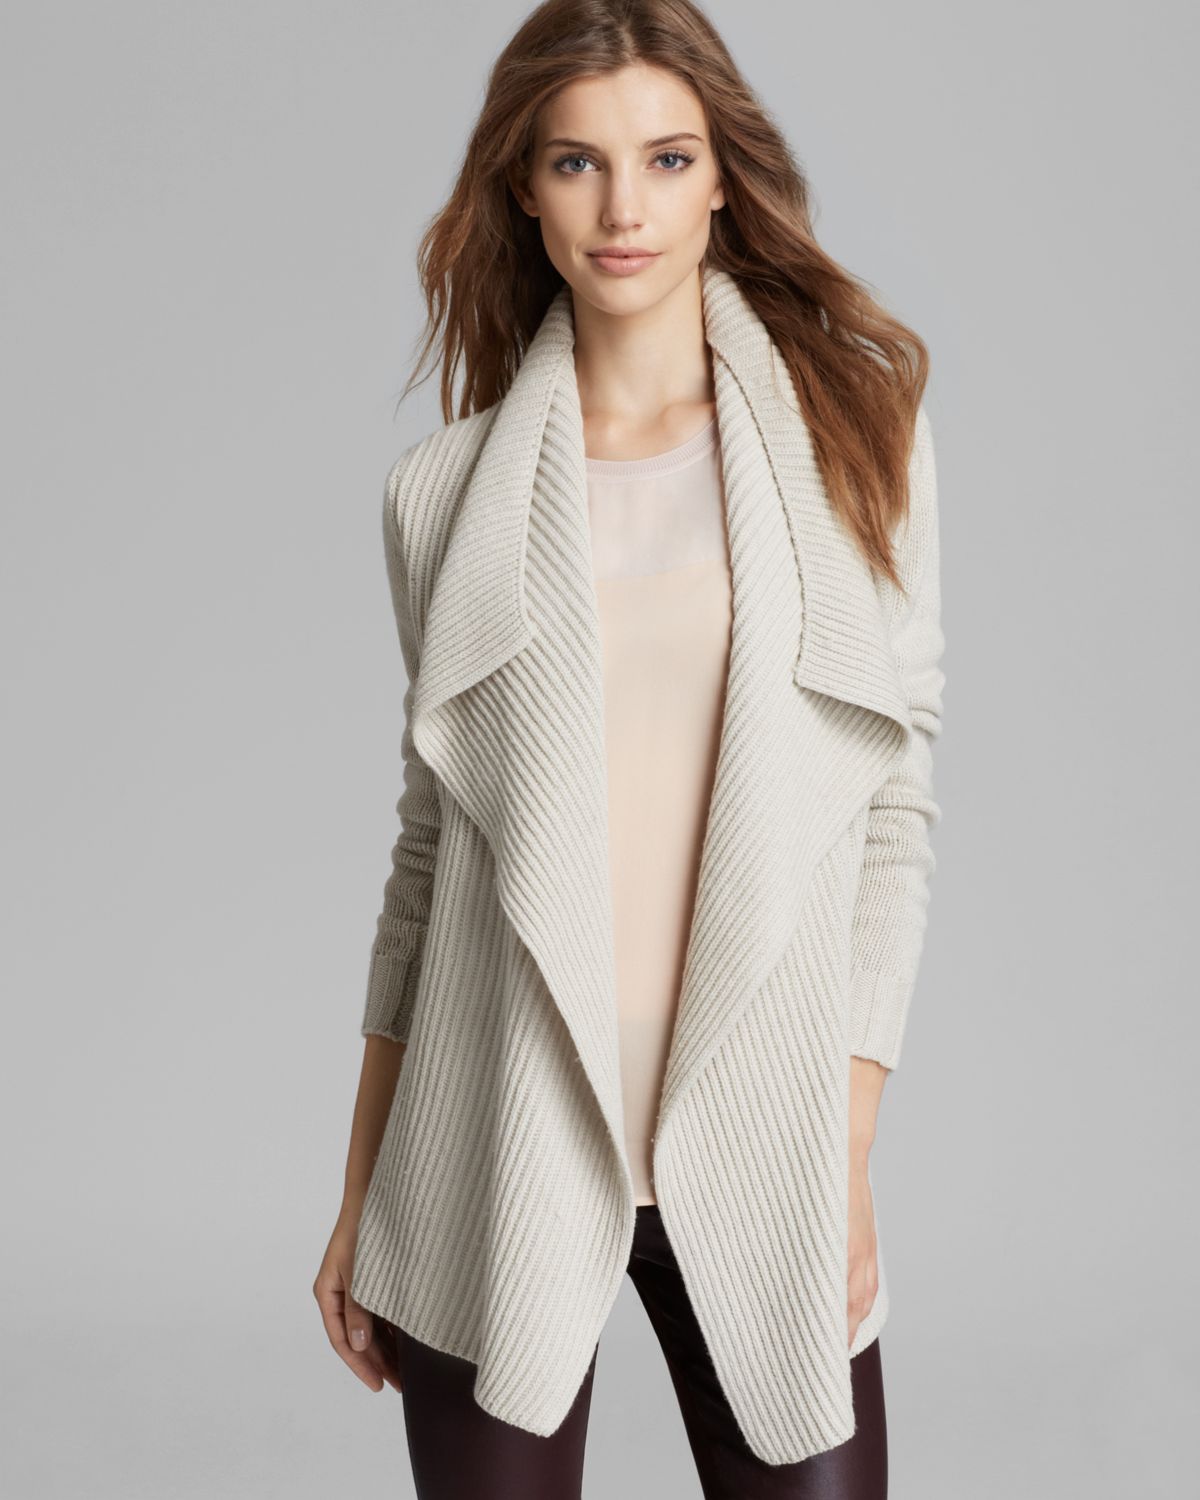 Lyst Vince  Cardigan  Drape Front in White